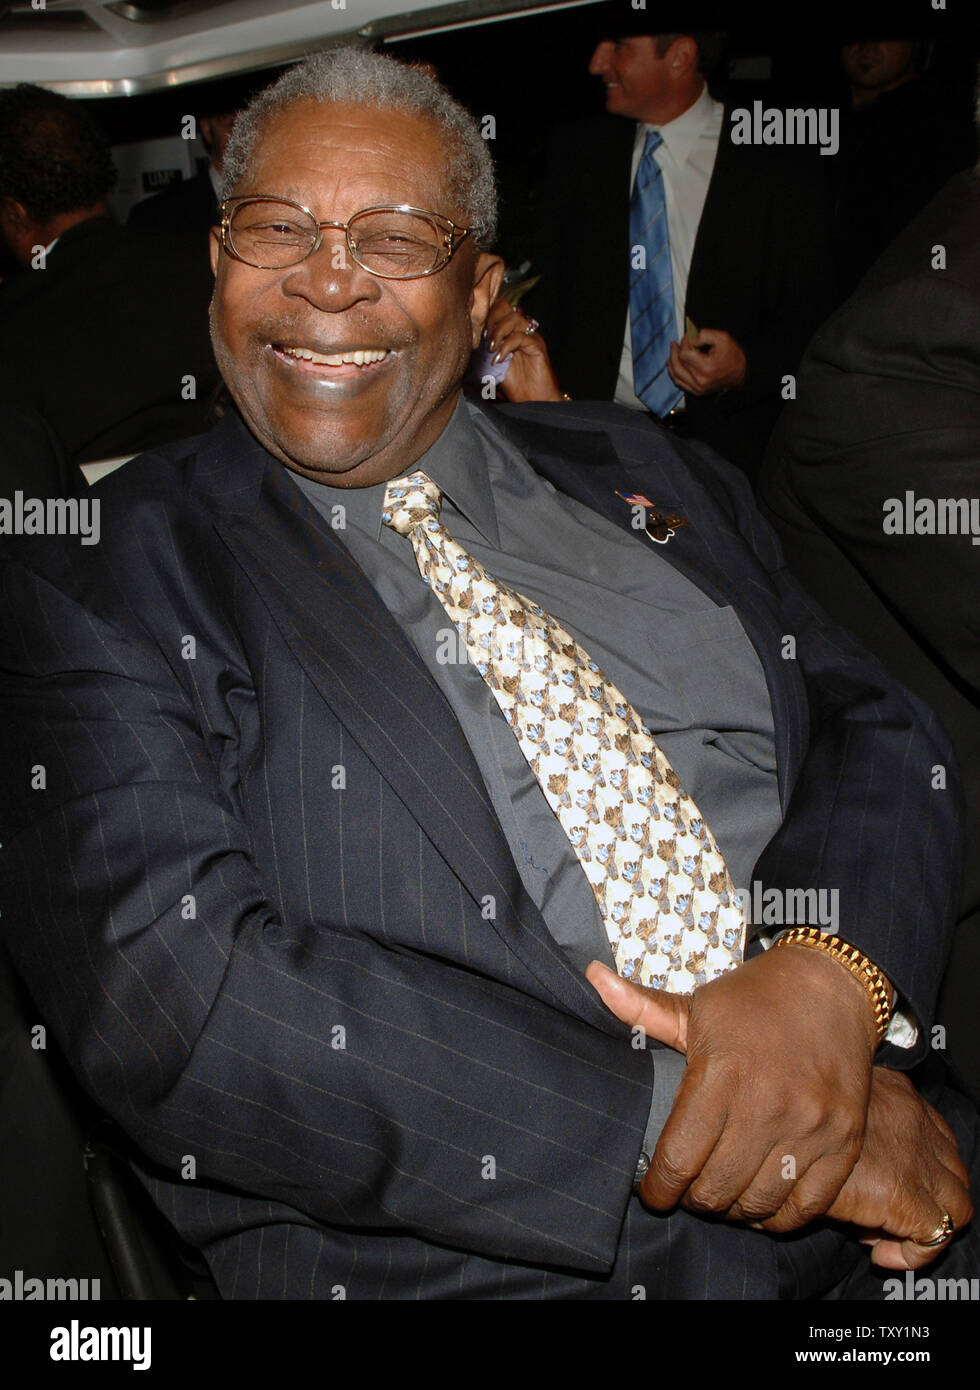 Blues legend B.B. King arrives for a celebration and fundraiser in honor of his 80th birthday at a private residence in Encino, California September 20, 2005. The event will benefit the forthcoming B.B. King Museum in Indianola, Mississippi.    (UPI Photo/Jim Ruymen) Stock Photo